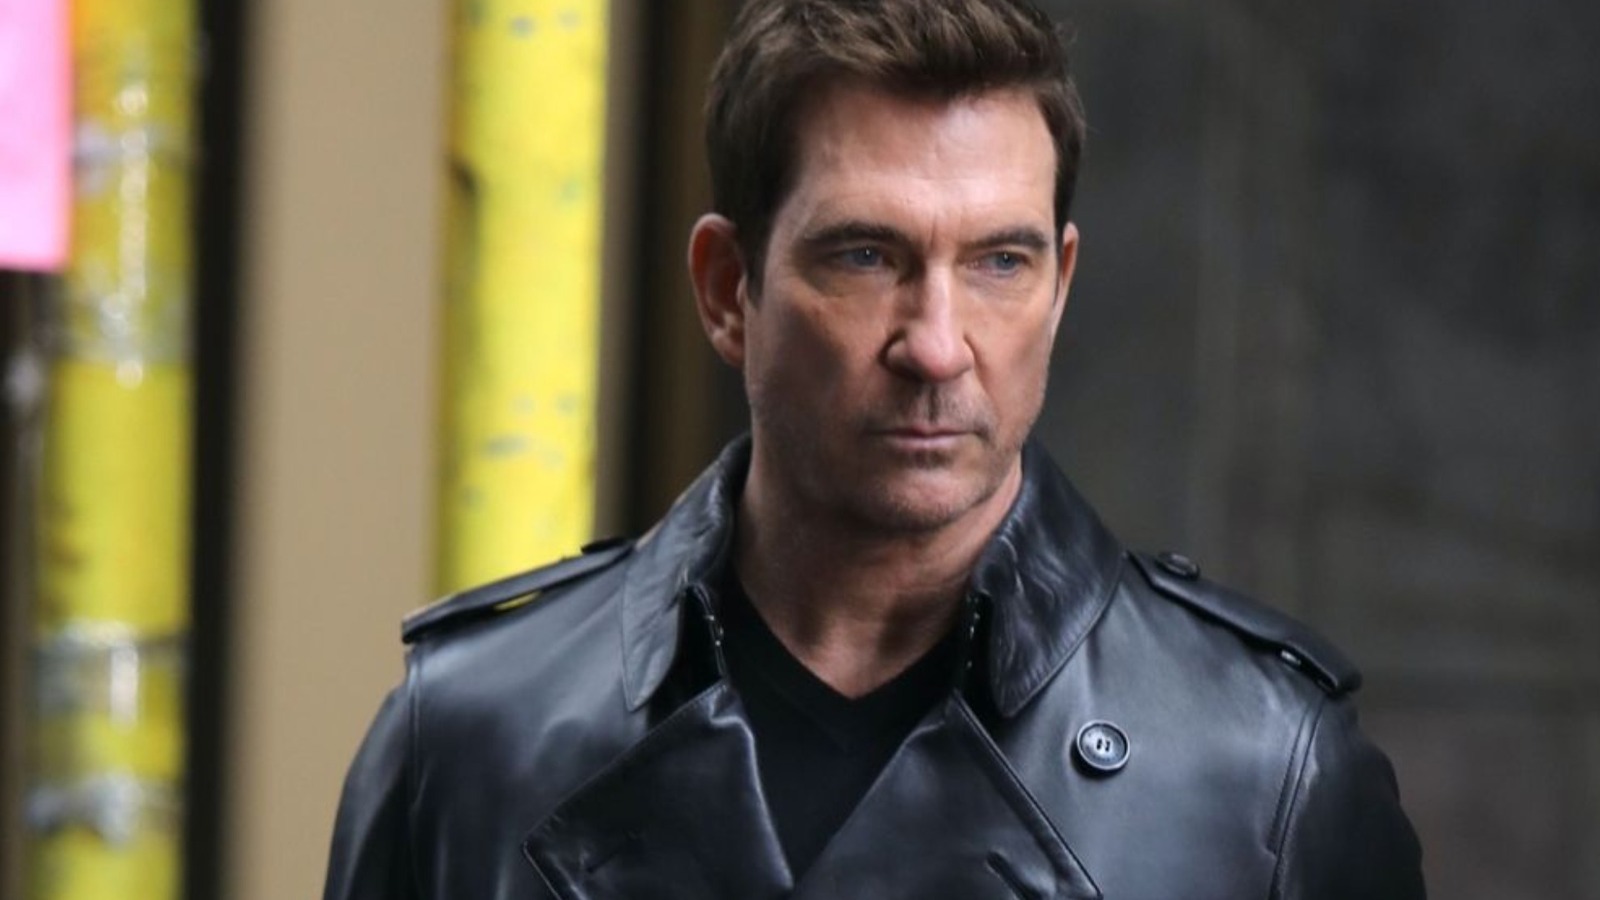 Dylan McDermott Has Conquered Law & Order, Now He's Ready For One Chicago